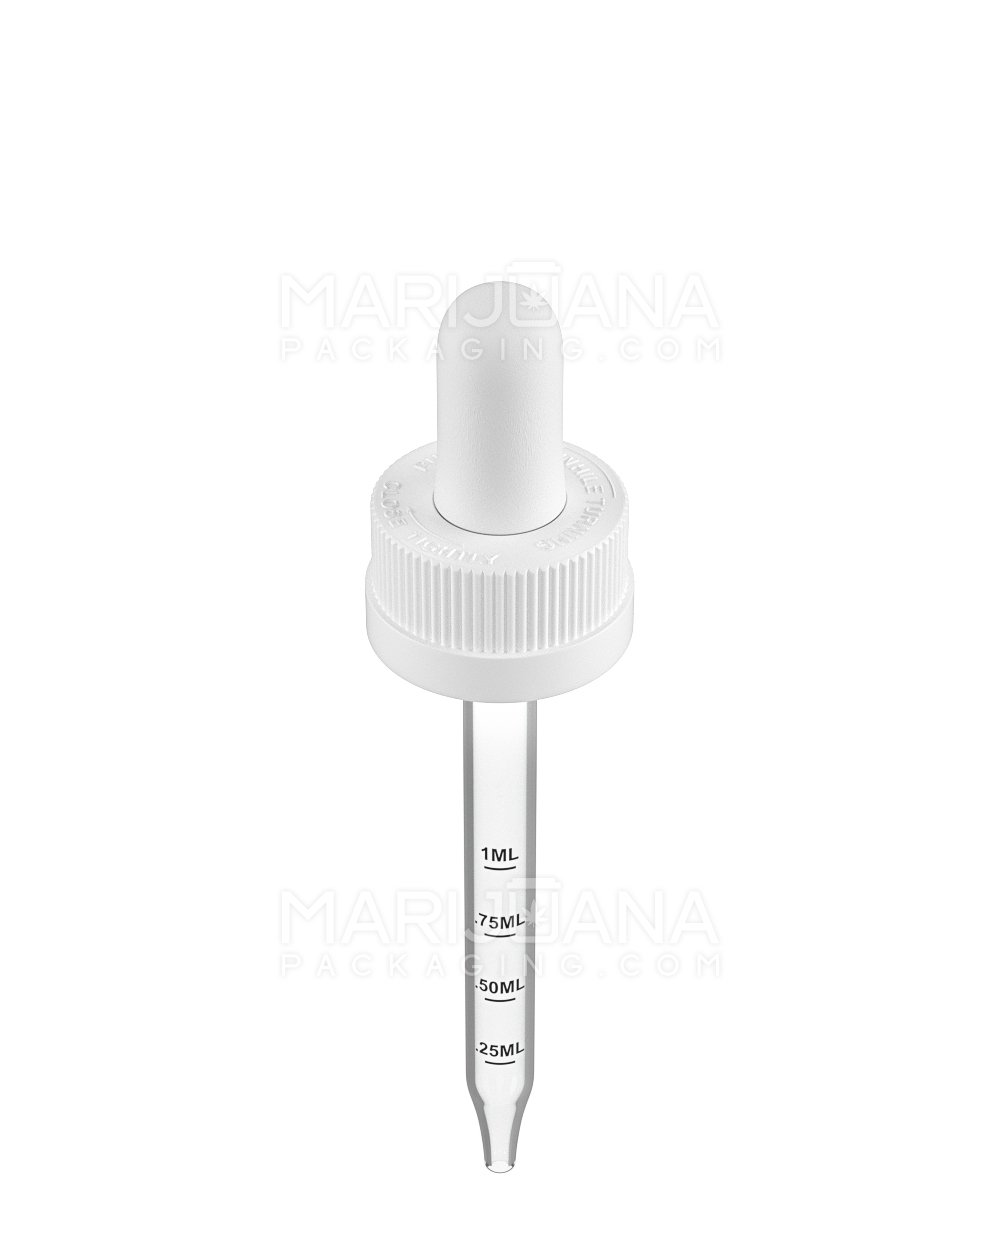 Child Resistant | White Graduated Ribbed Glass Dropper Cap | 2oz - 1mL - 240 Count - 2